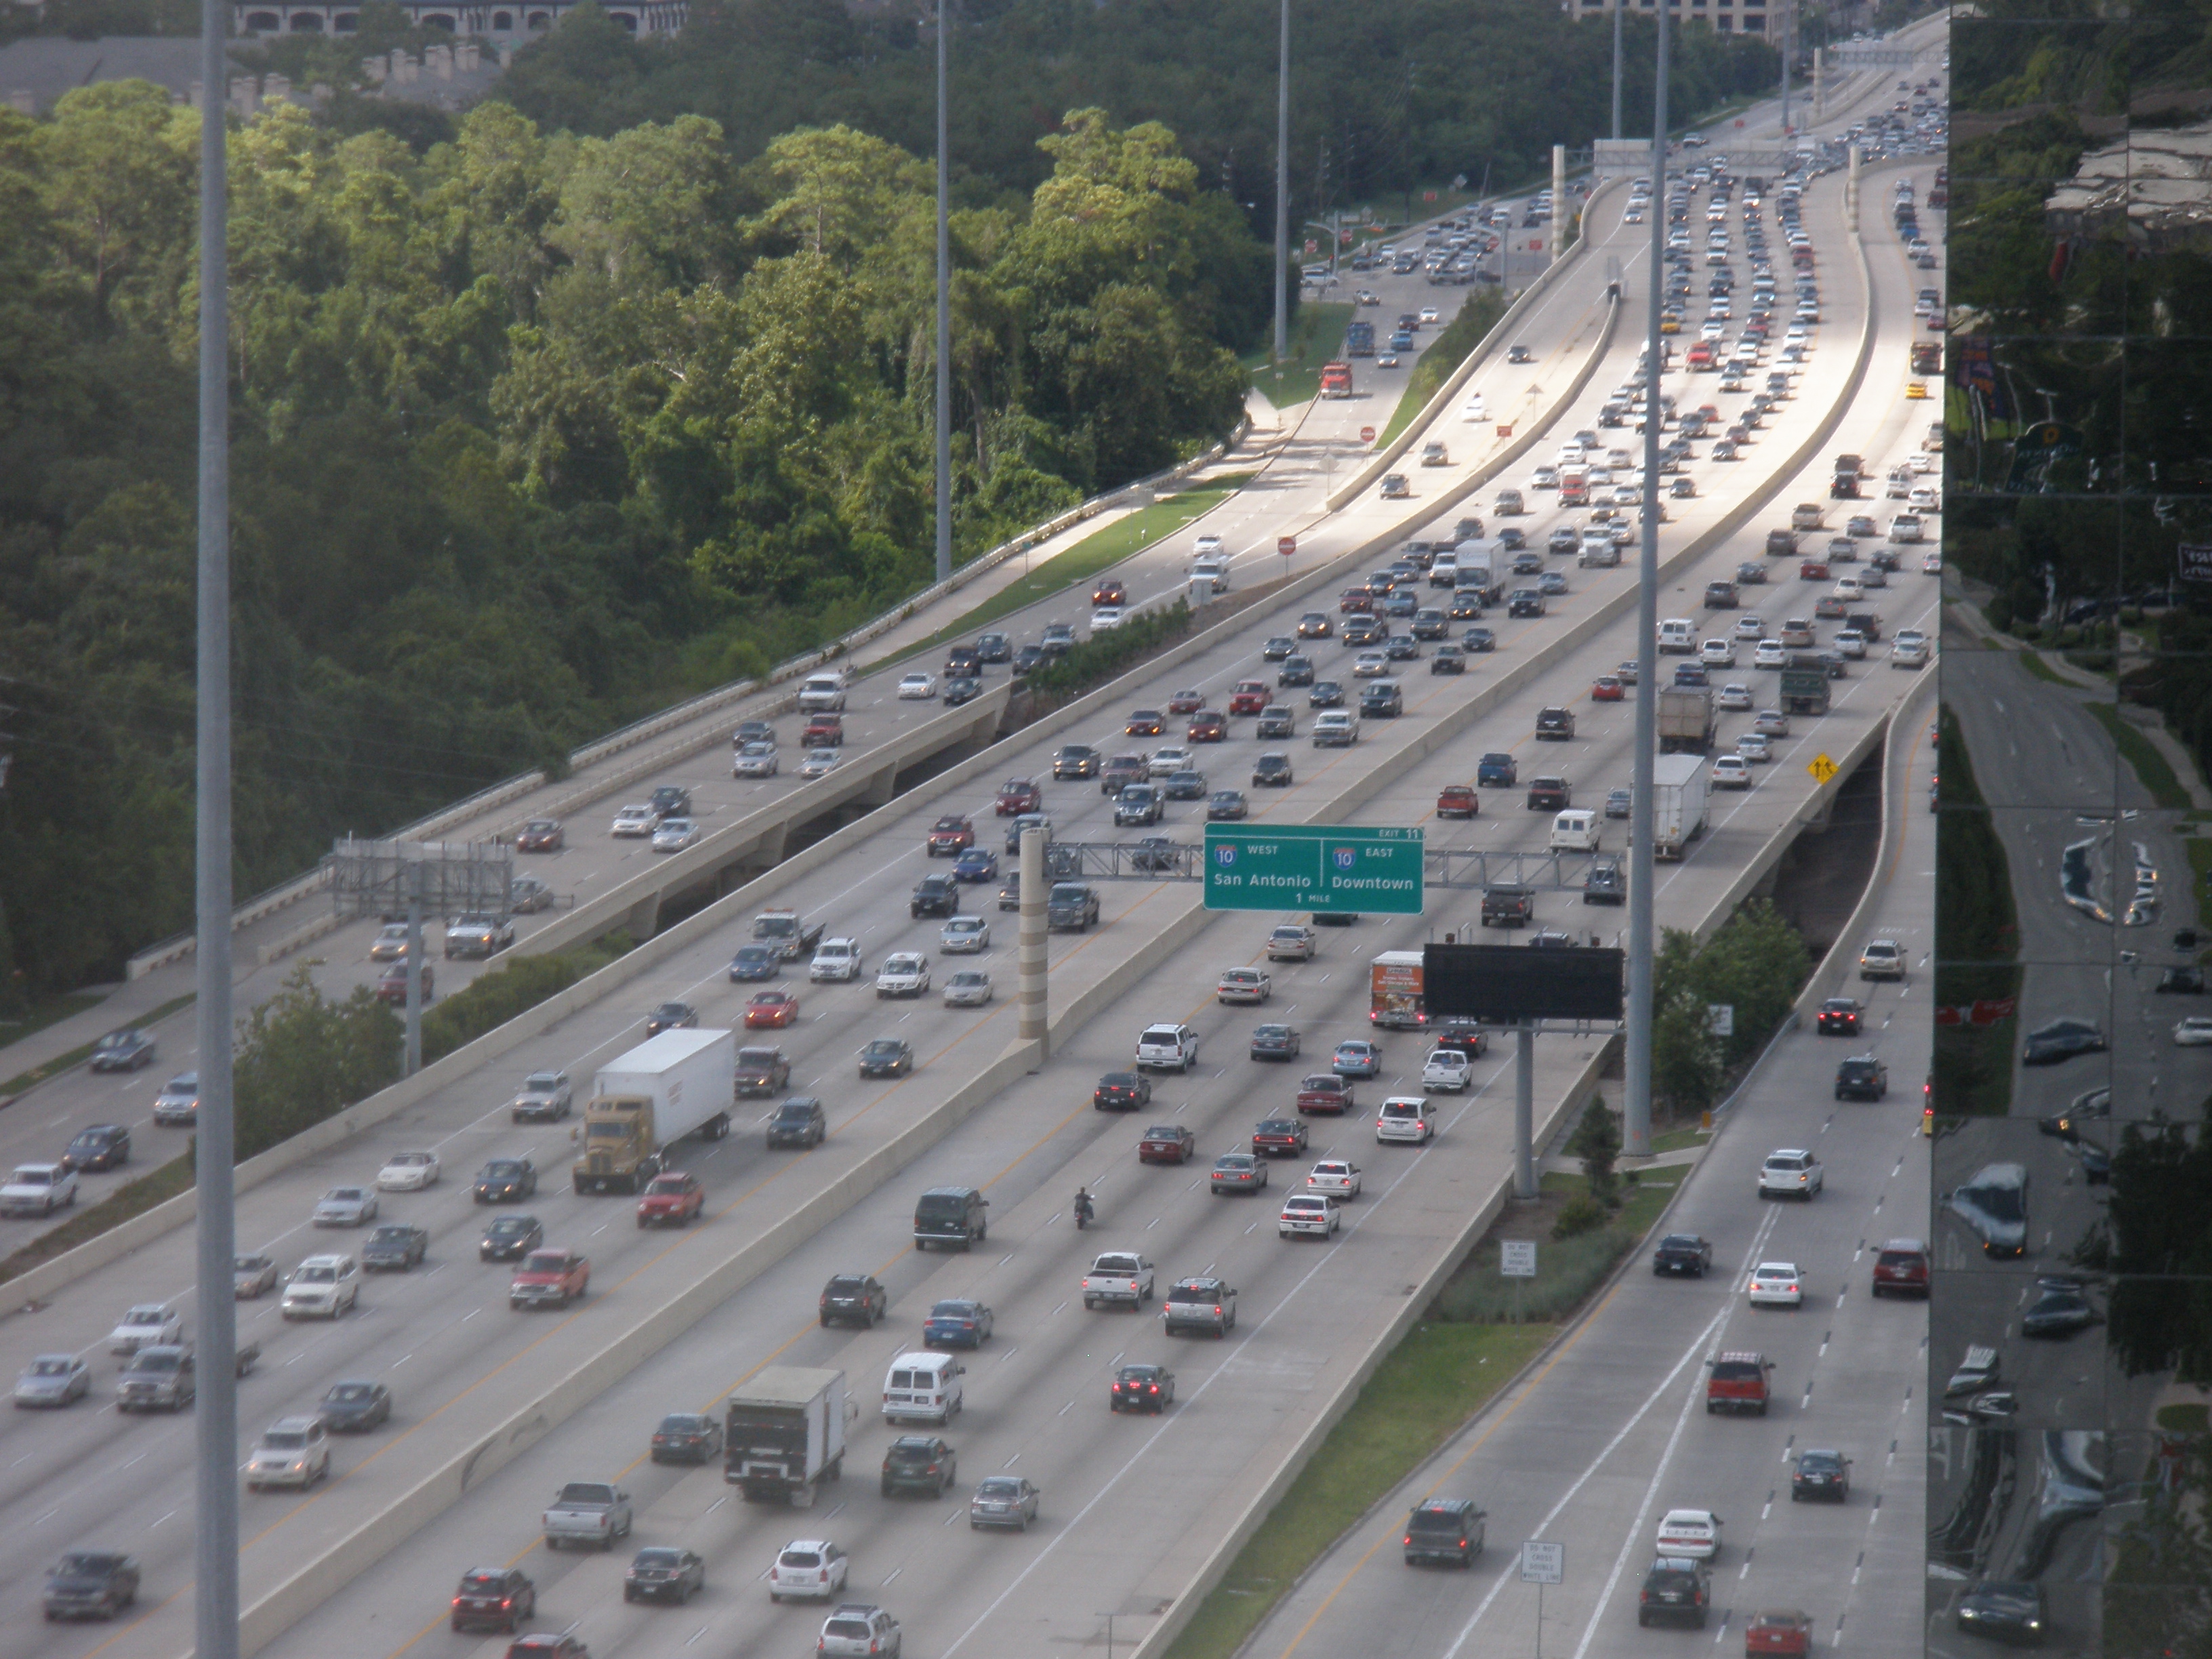 Houston's West Loop Freeway. How many of these lanes were in the national interest?